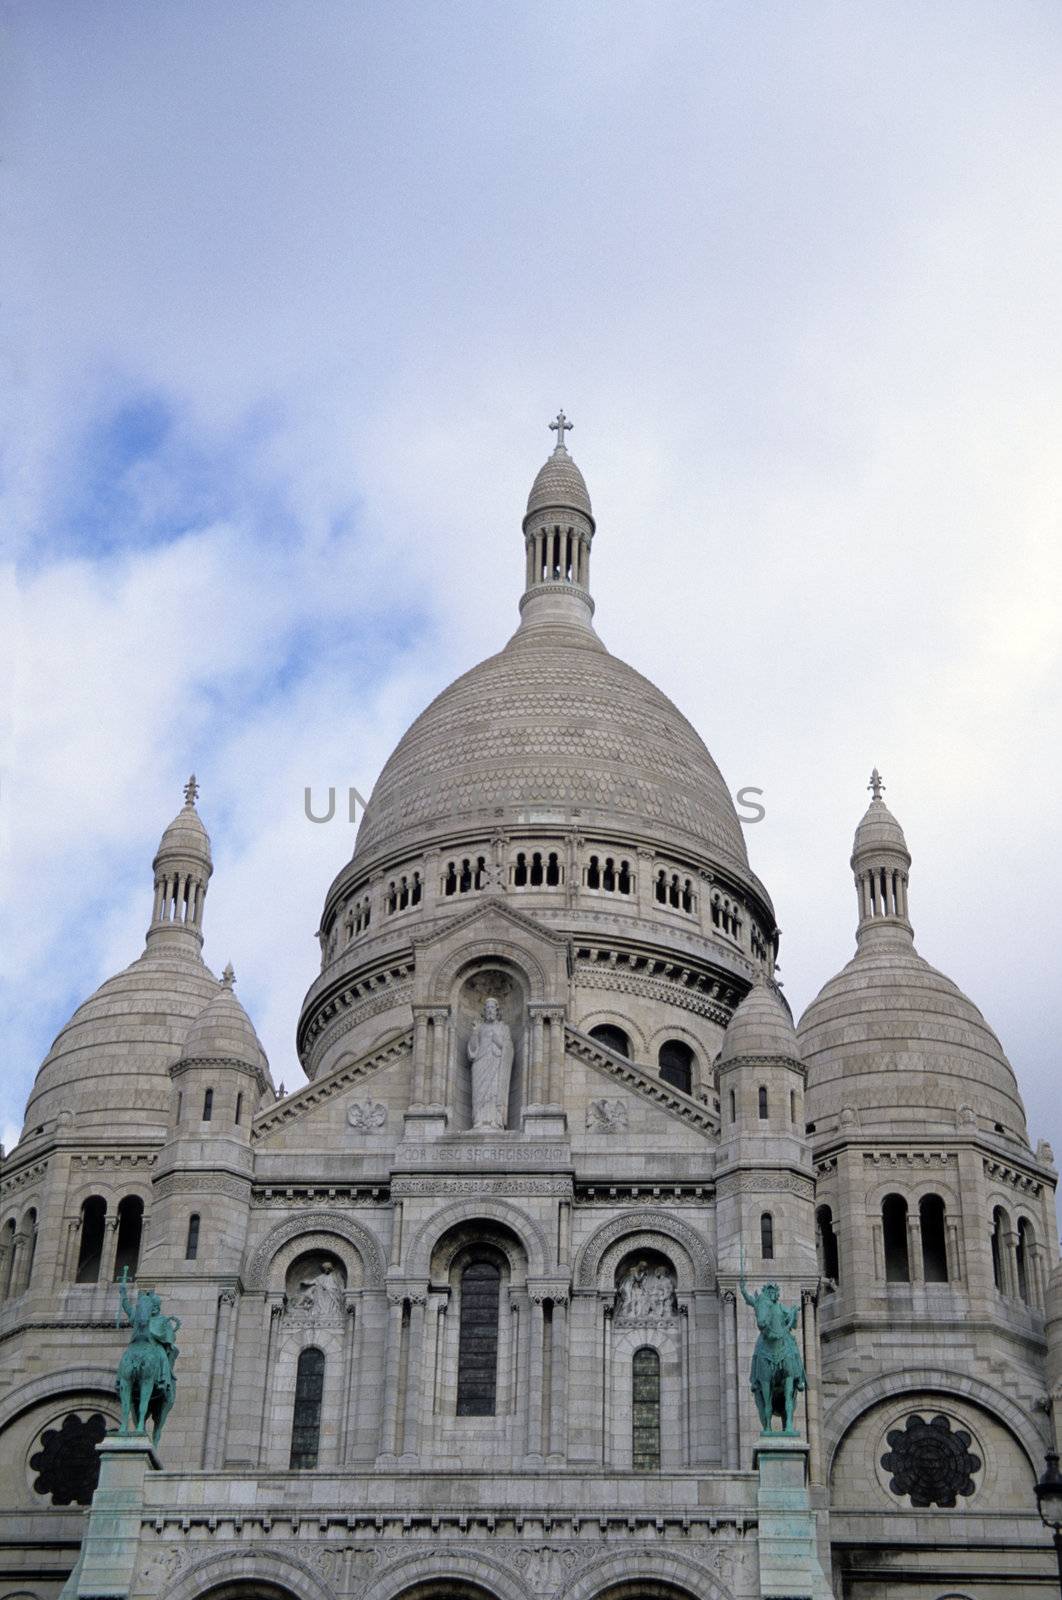 Detail of the upper portion of Sacre Coeur in Paris, France.